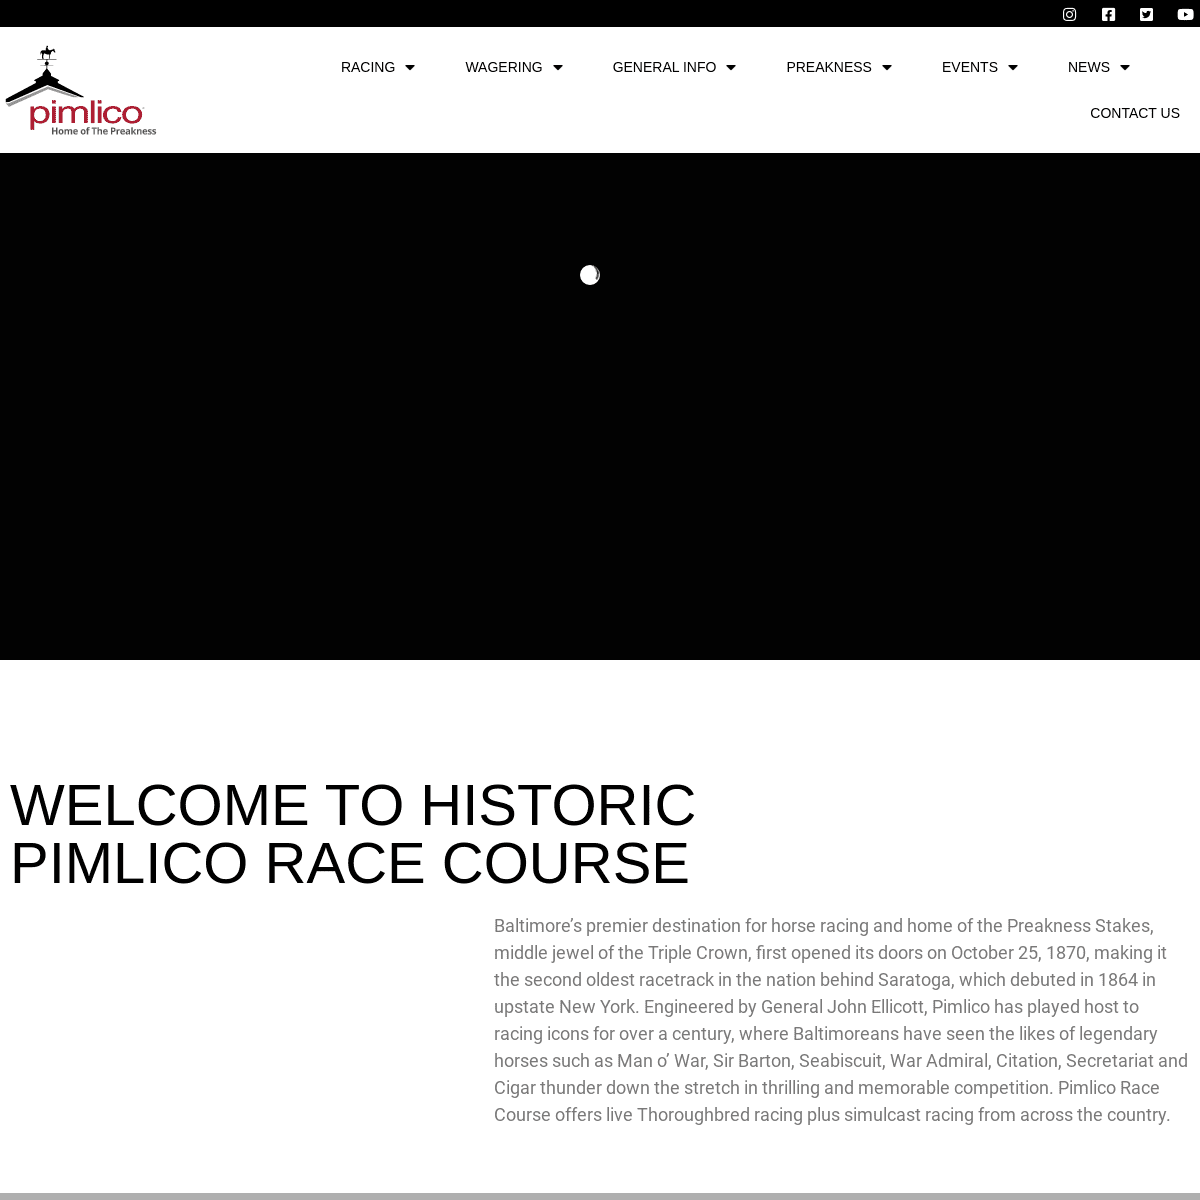 A complete backup of https://pimlico.com